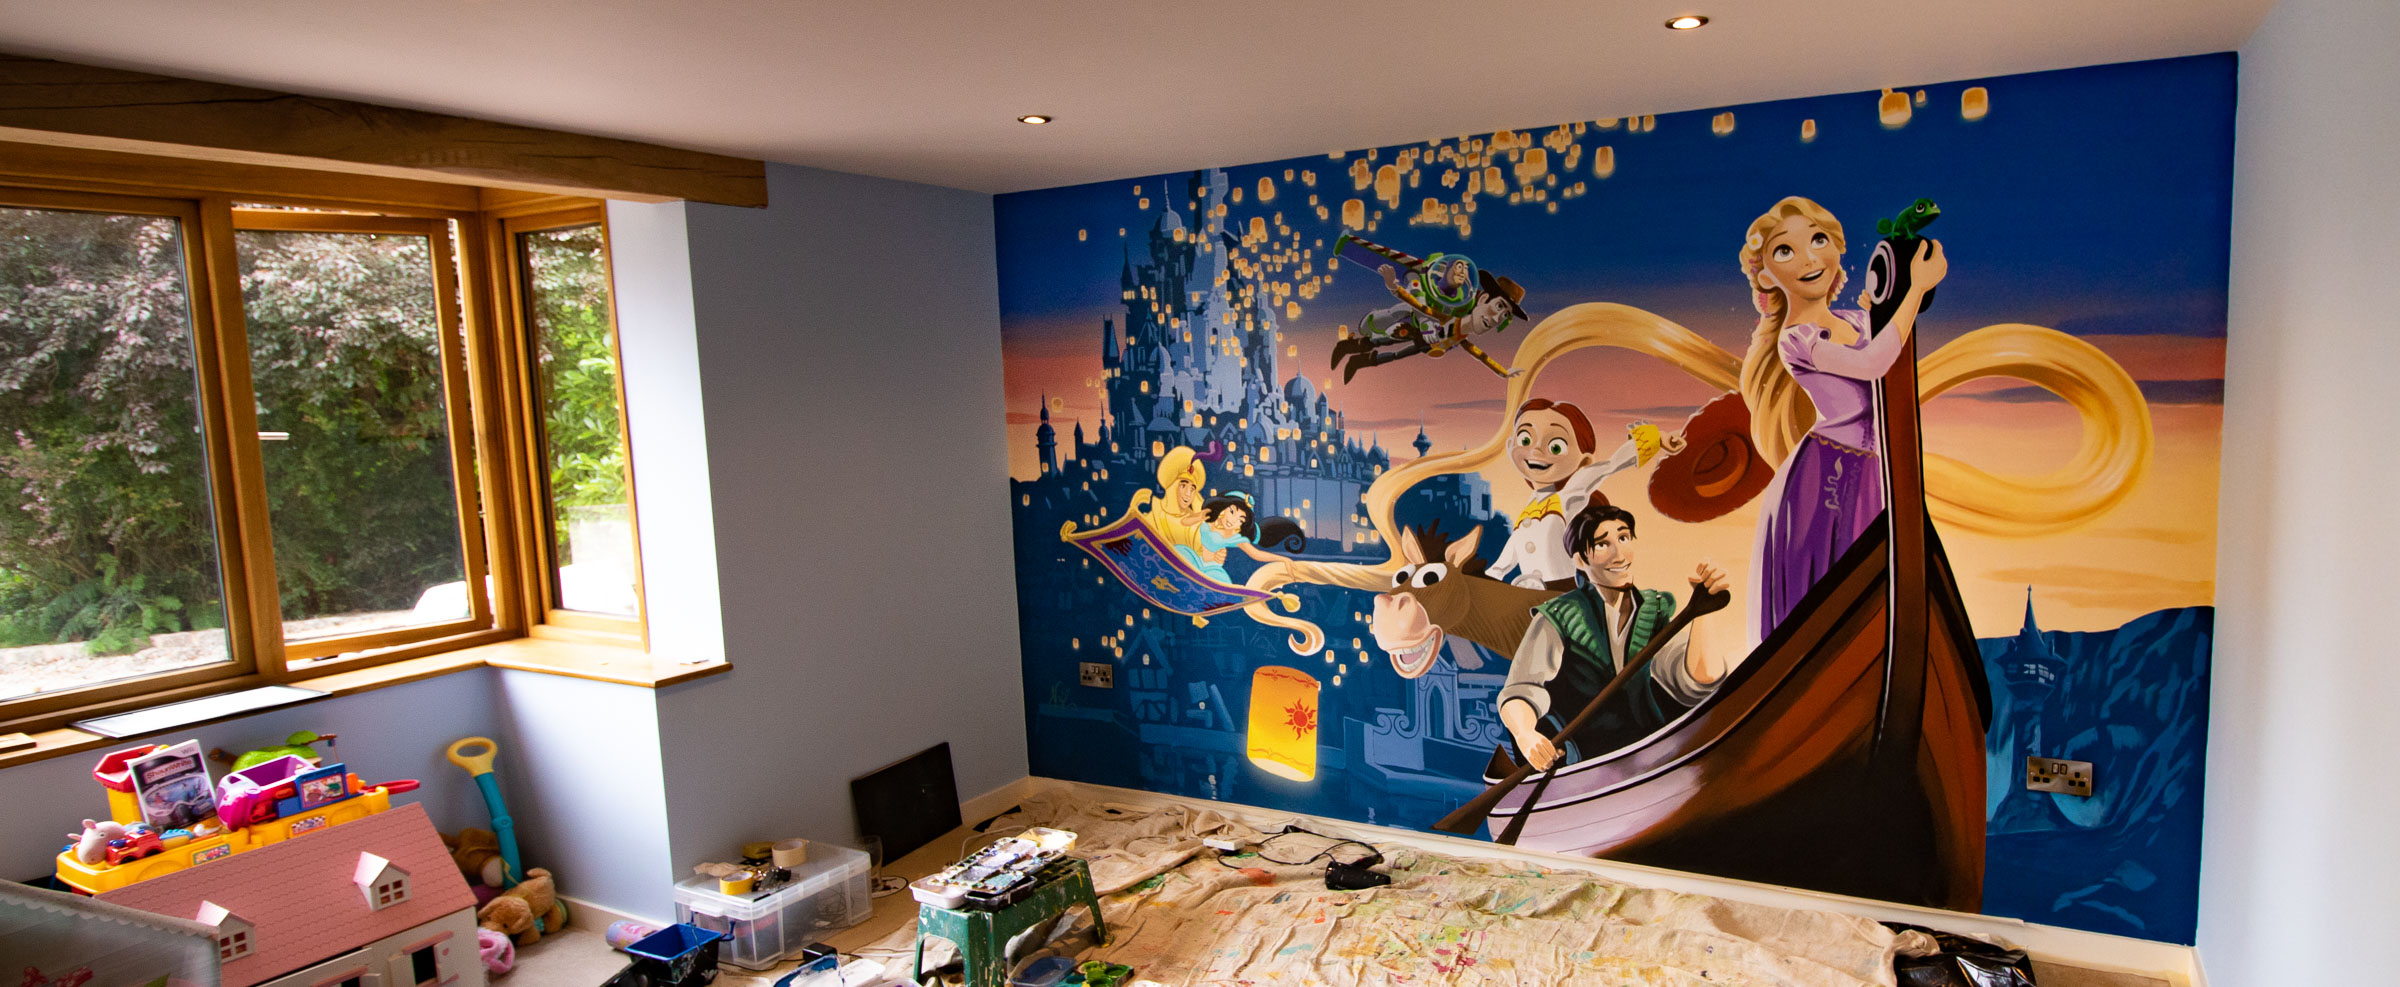 Buzz Lighyear and Woody, "Falling with style" in Disney mural